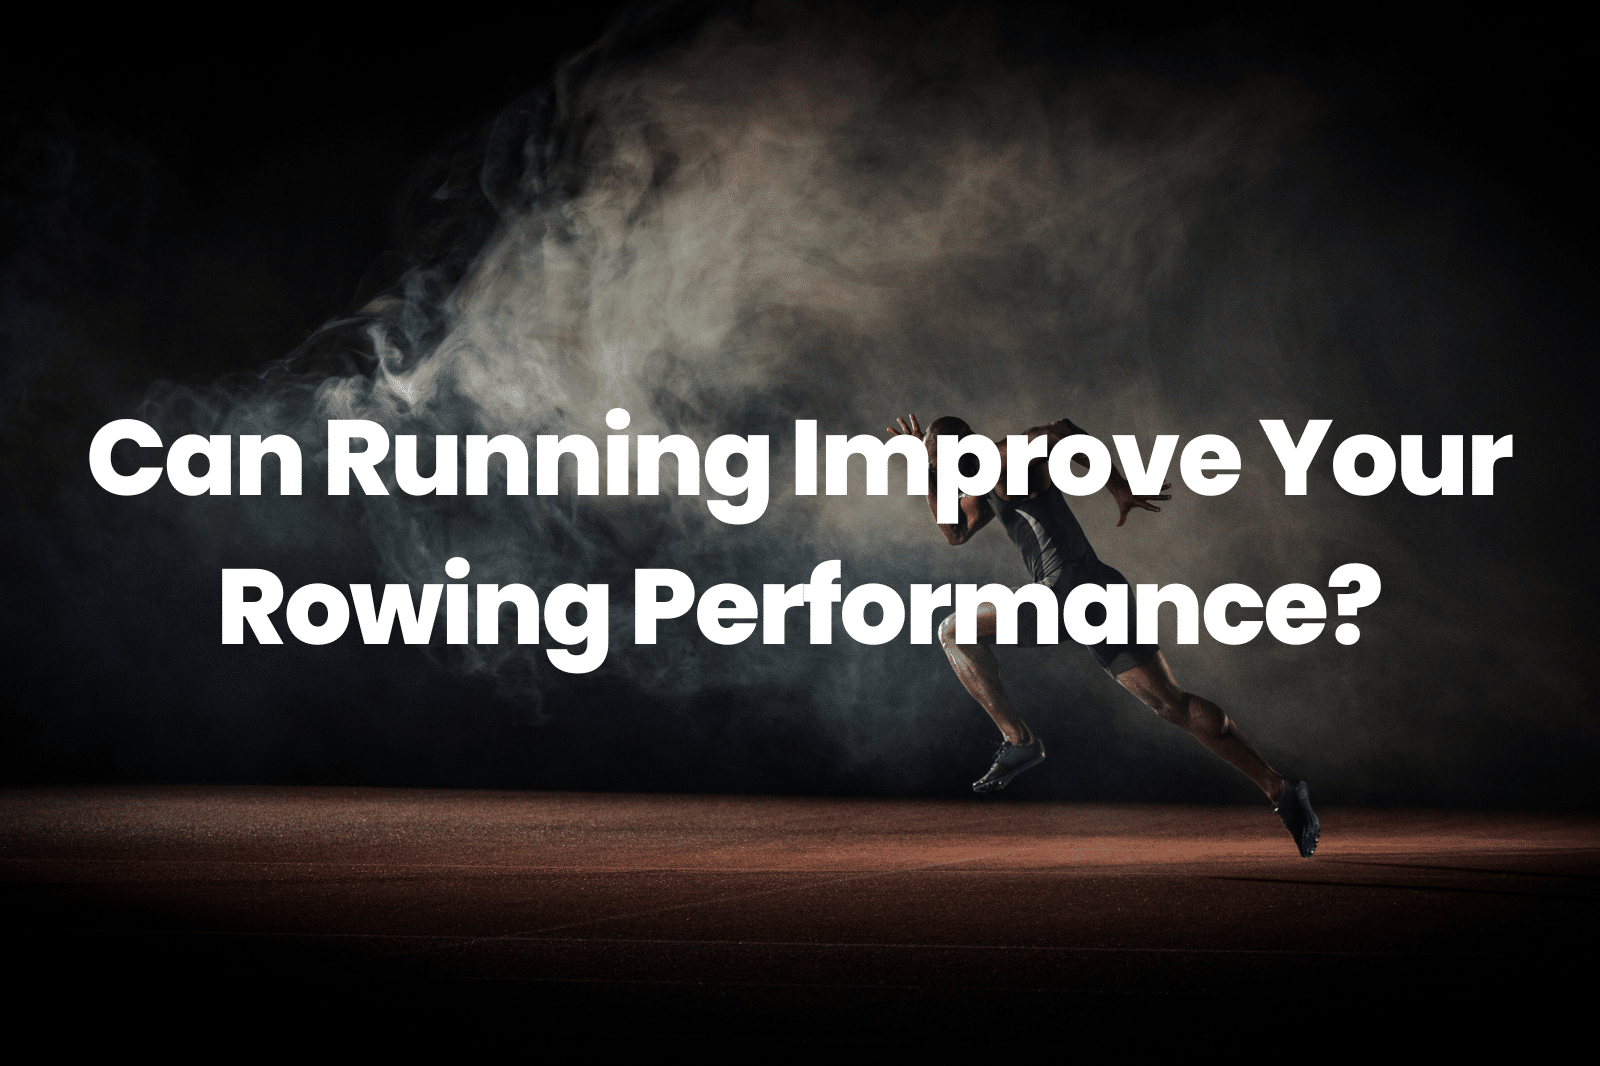 Rowing Performance